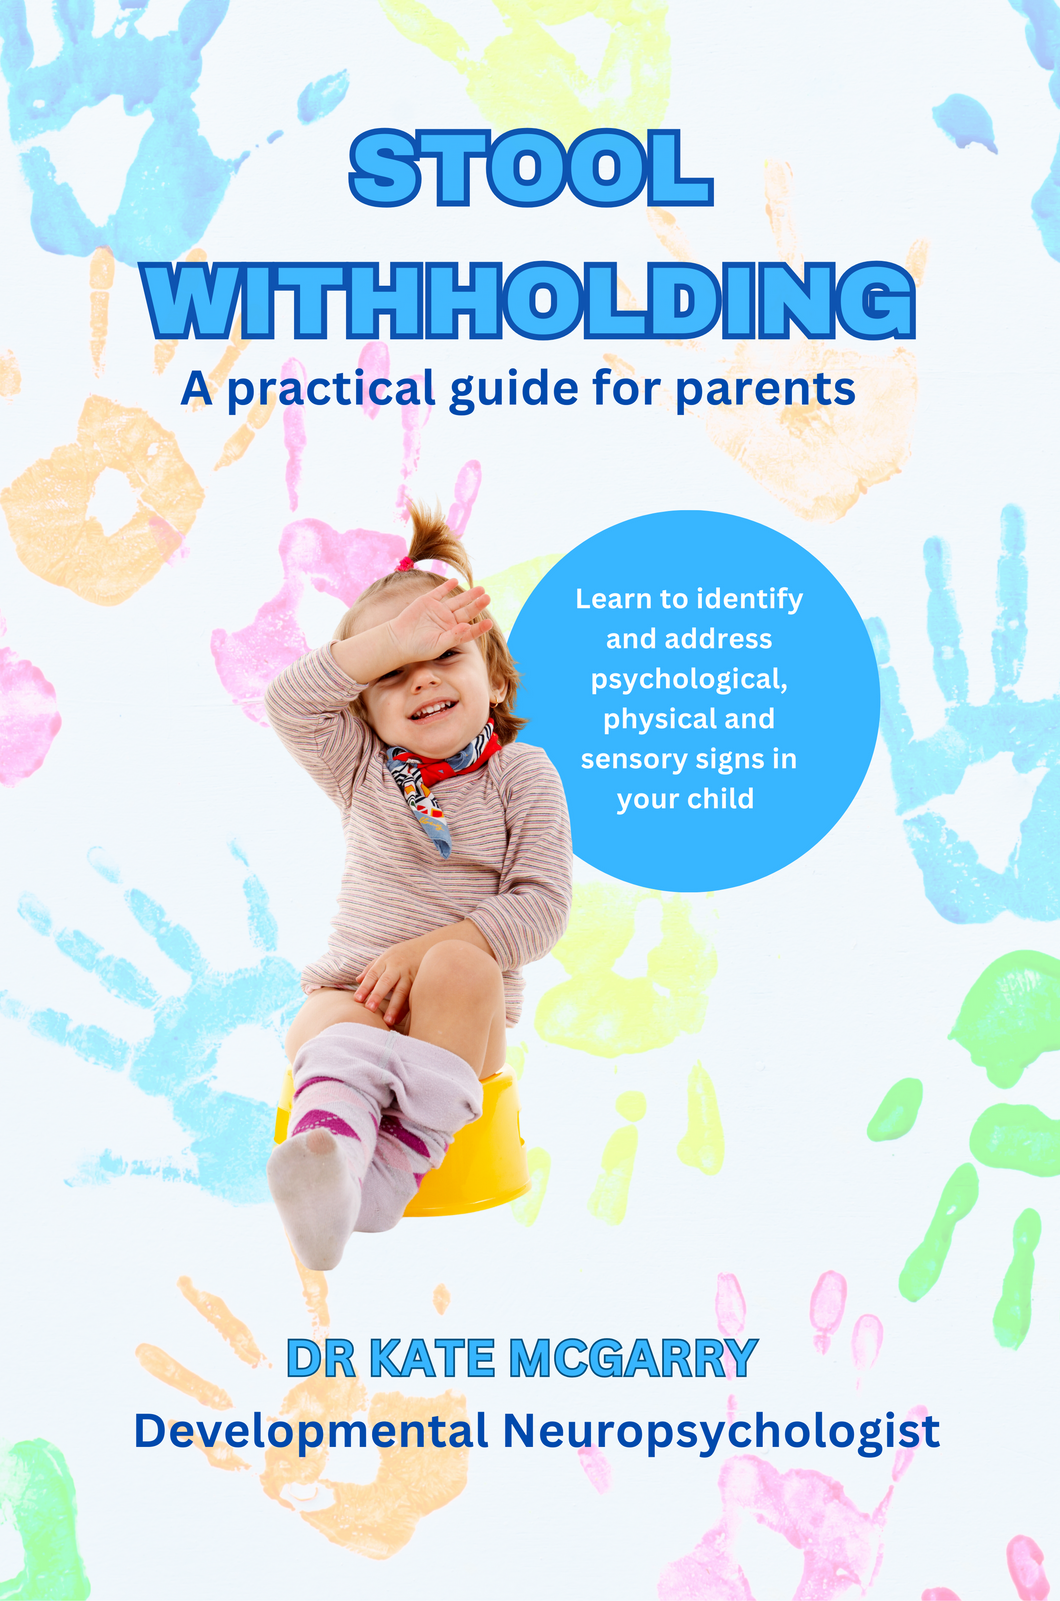 Stool Withholding - A practical guide for parents by Dr Kate McGarry